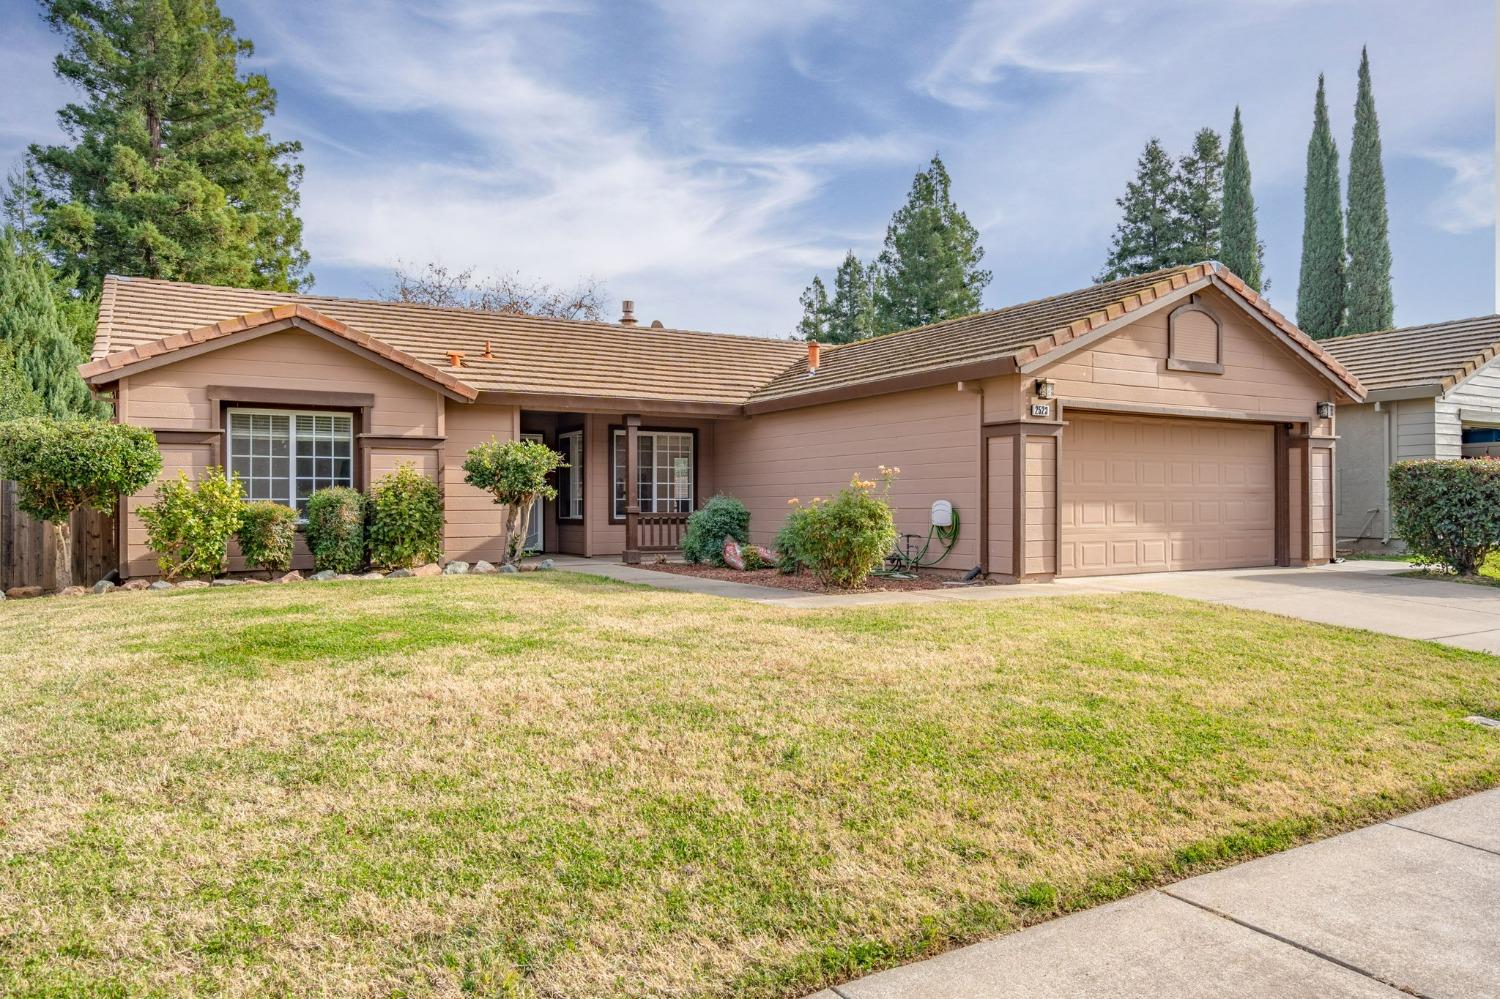 Photo of 2523 Drummond Dr in Yuba City, CA